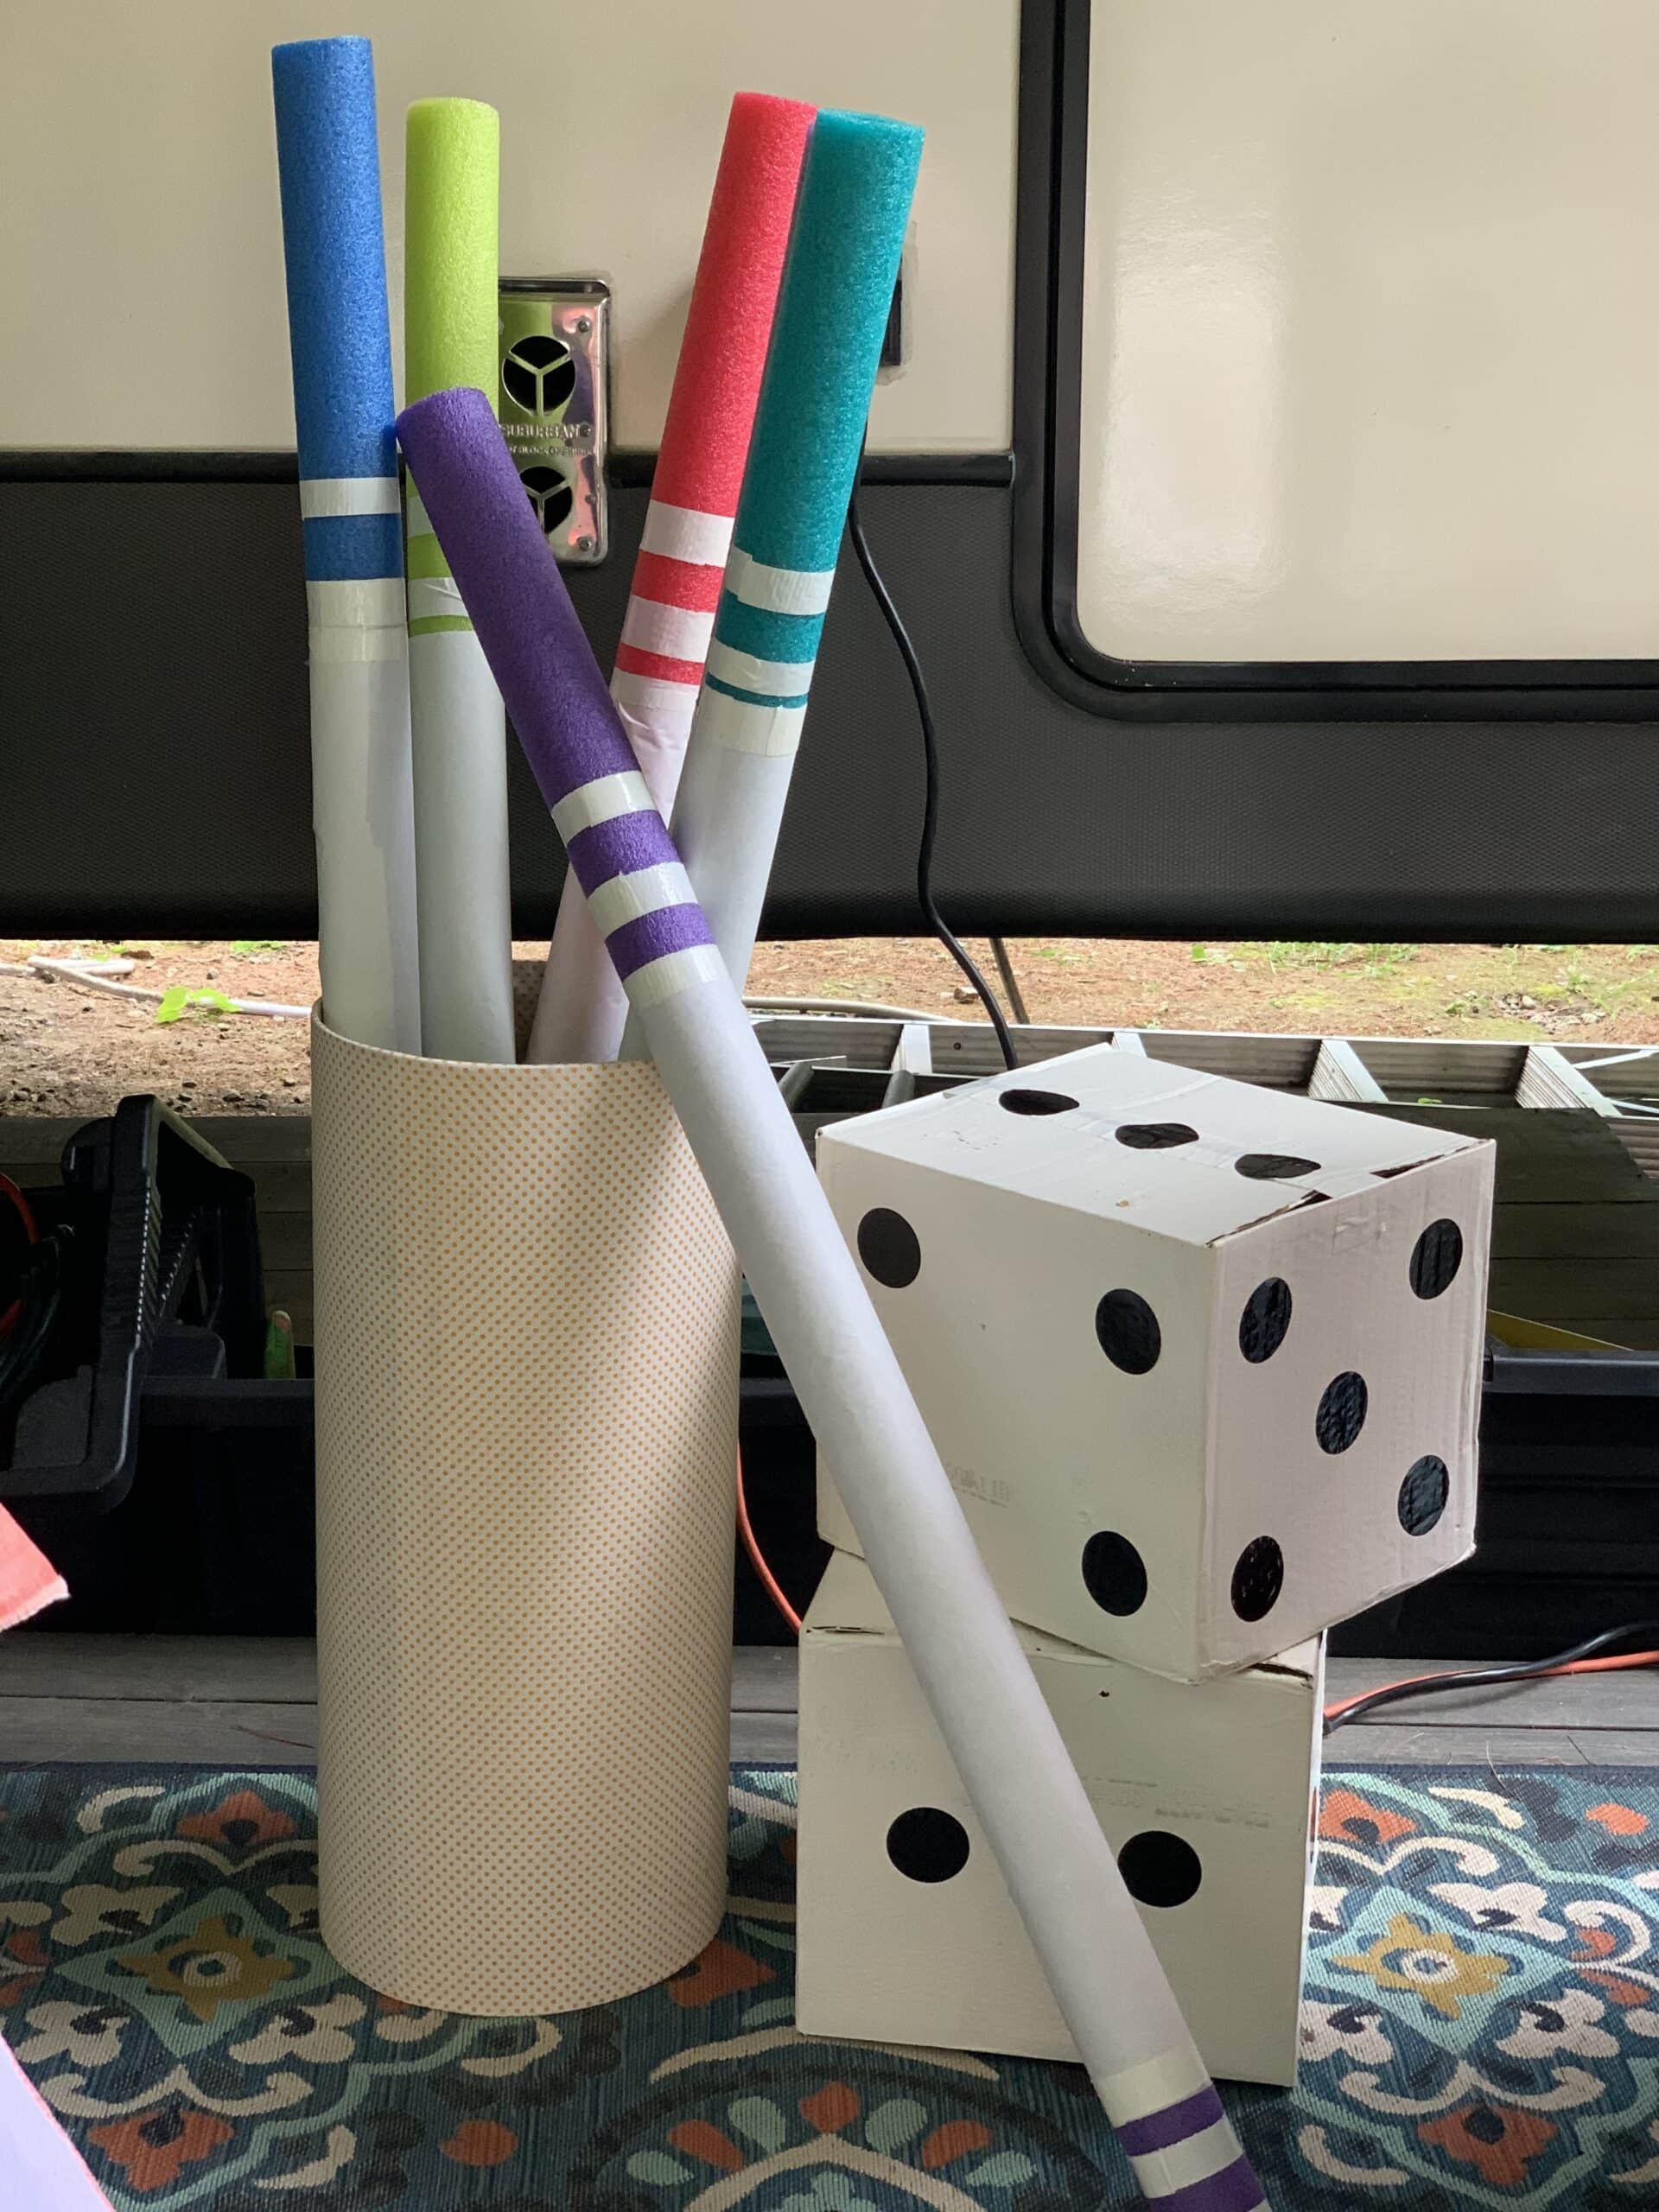 DIY markers and dice made from pool noodles and carboard box